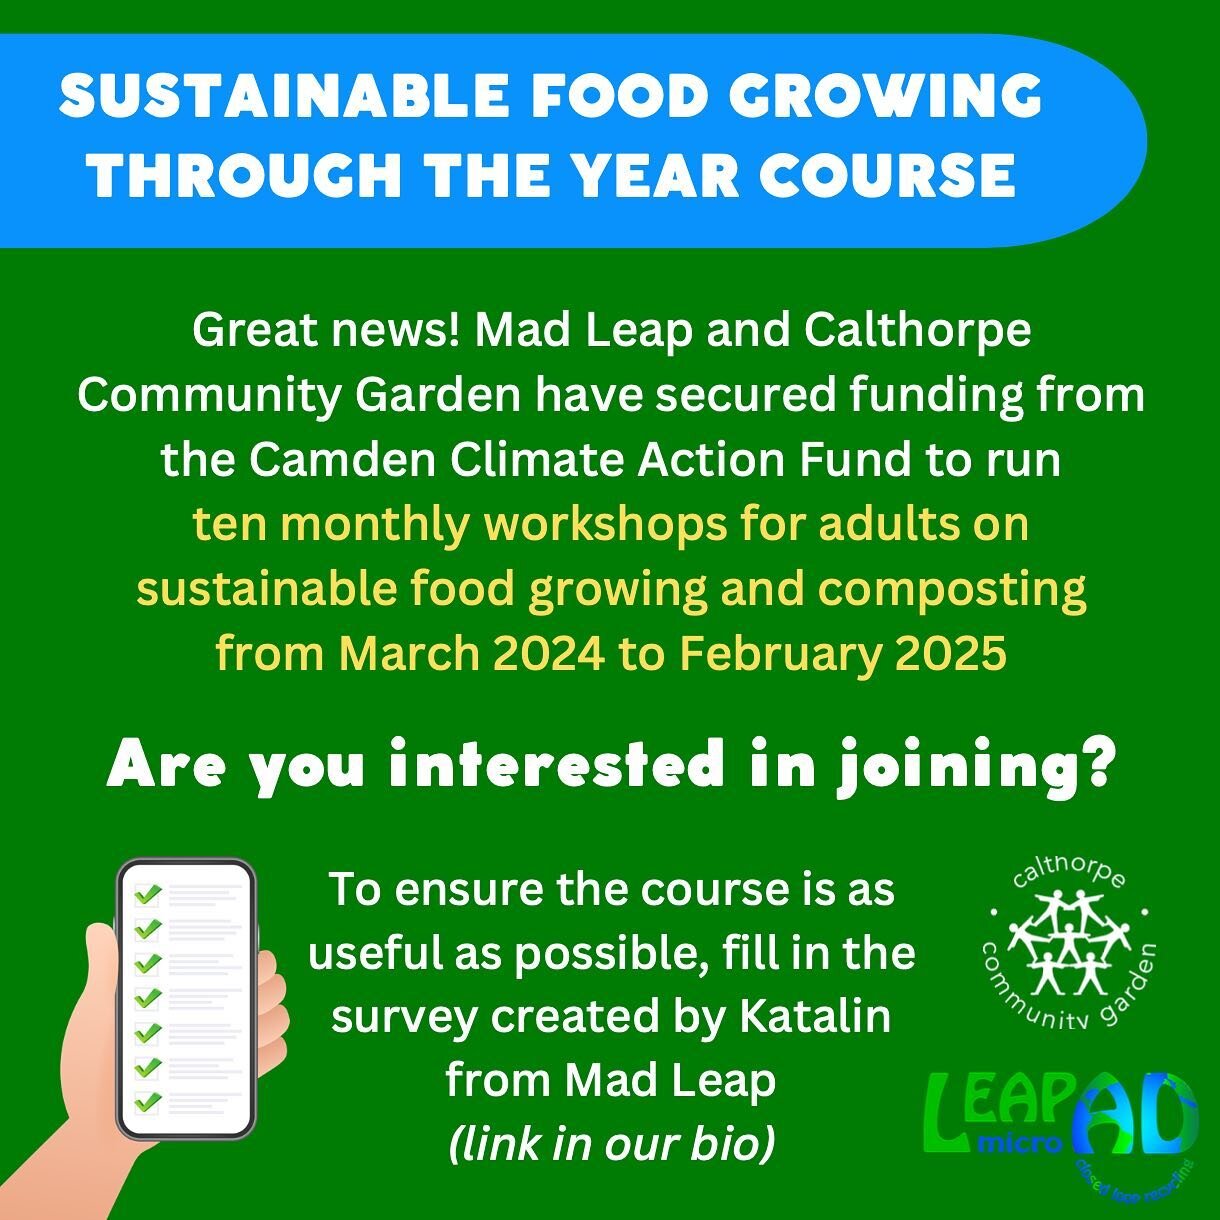 Great news! Mad Leap and Calthorpe Community Garden have secured funding from the Camden Climate Action Fund to run ten monthly workshops for adults on sustainable food growing and composting from March 2024 to February 2025.

Are you interested in j